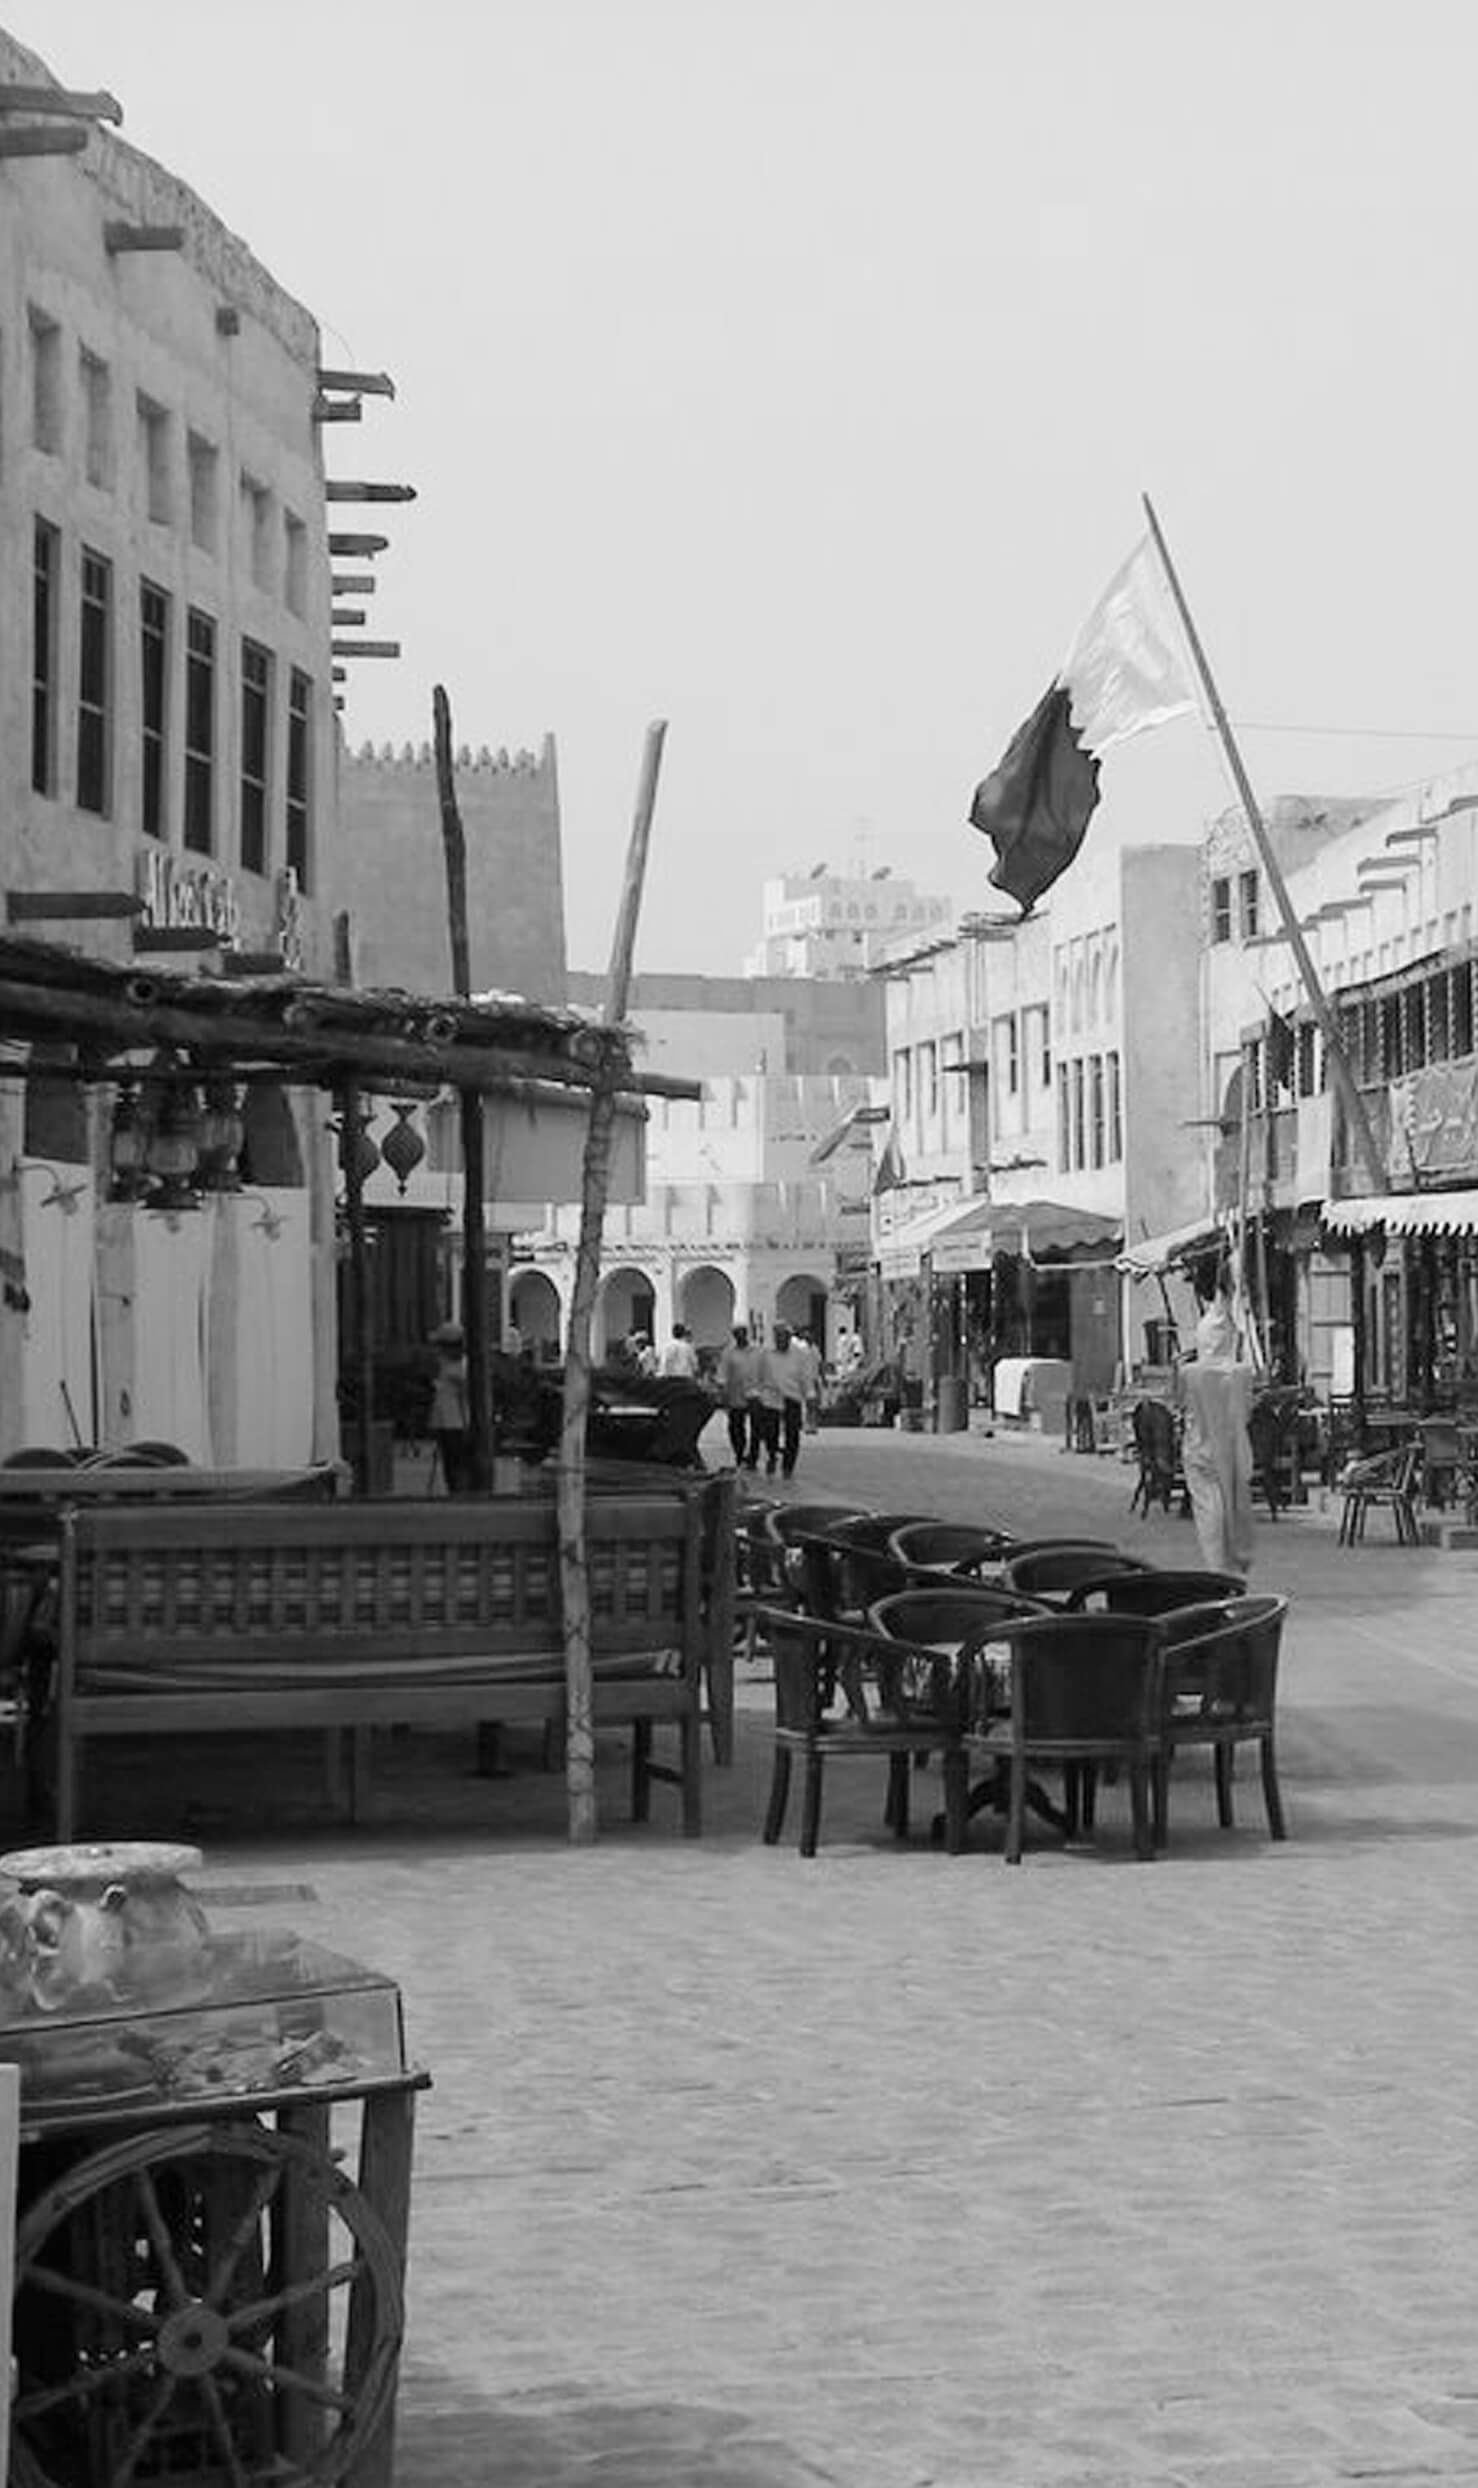 souq waqif black and white picture